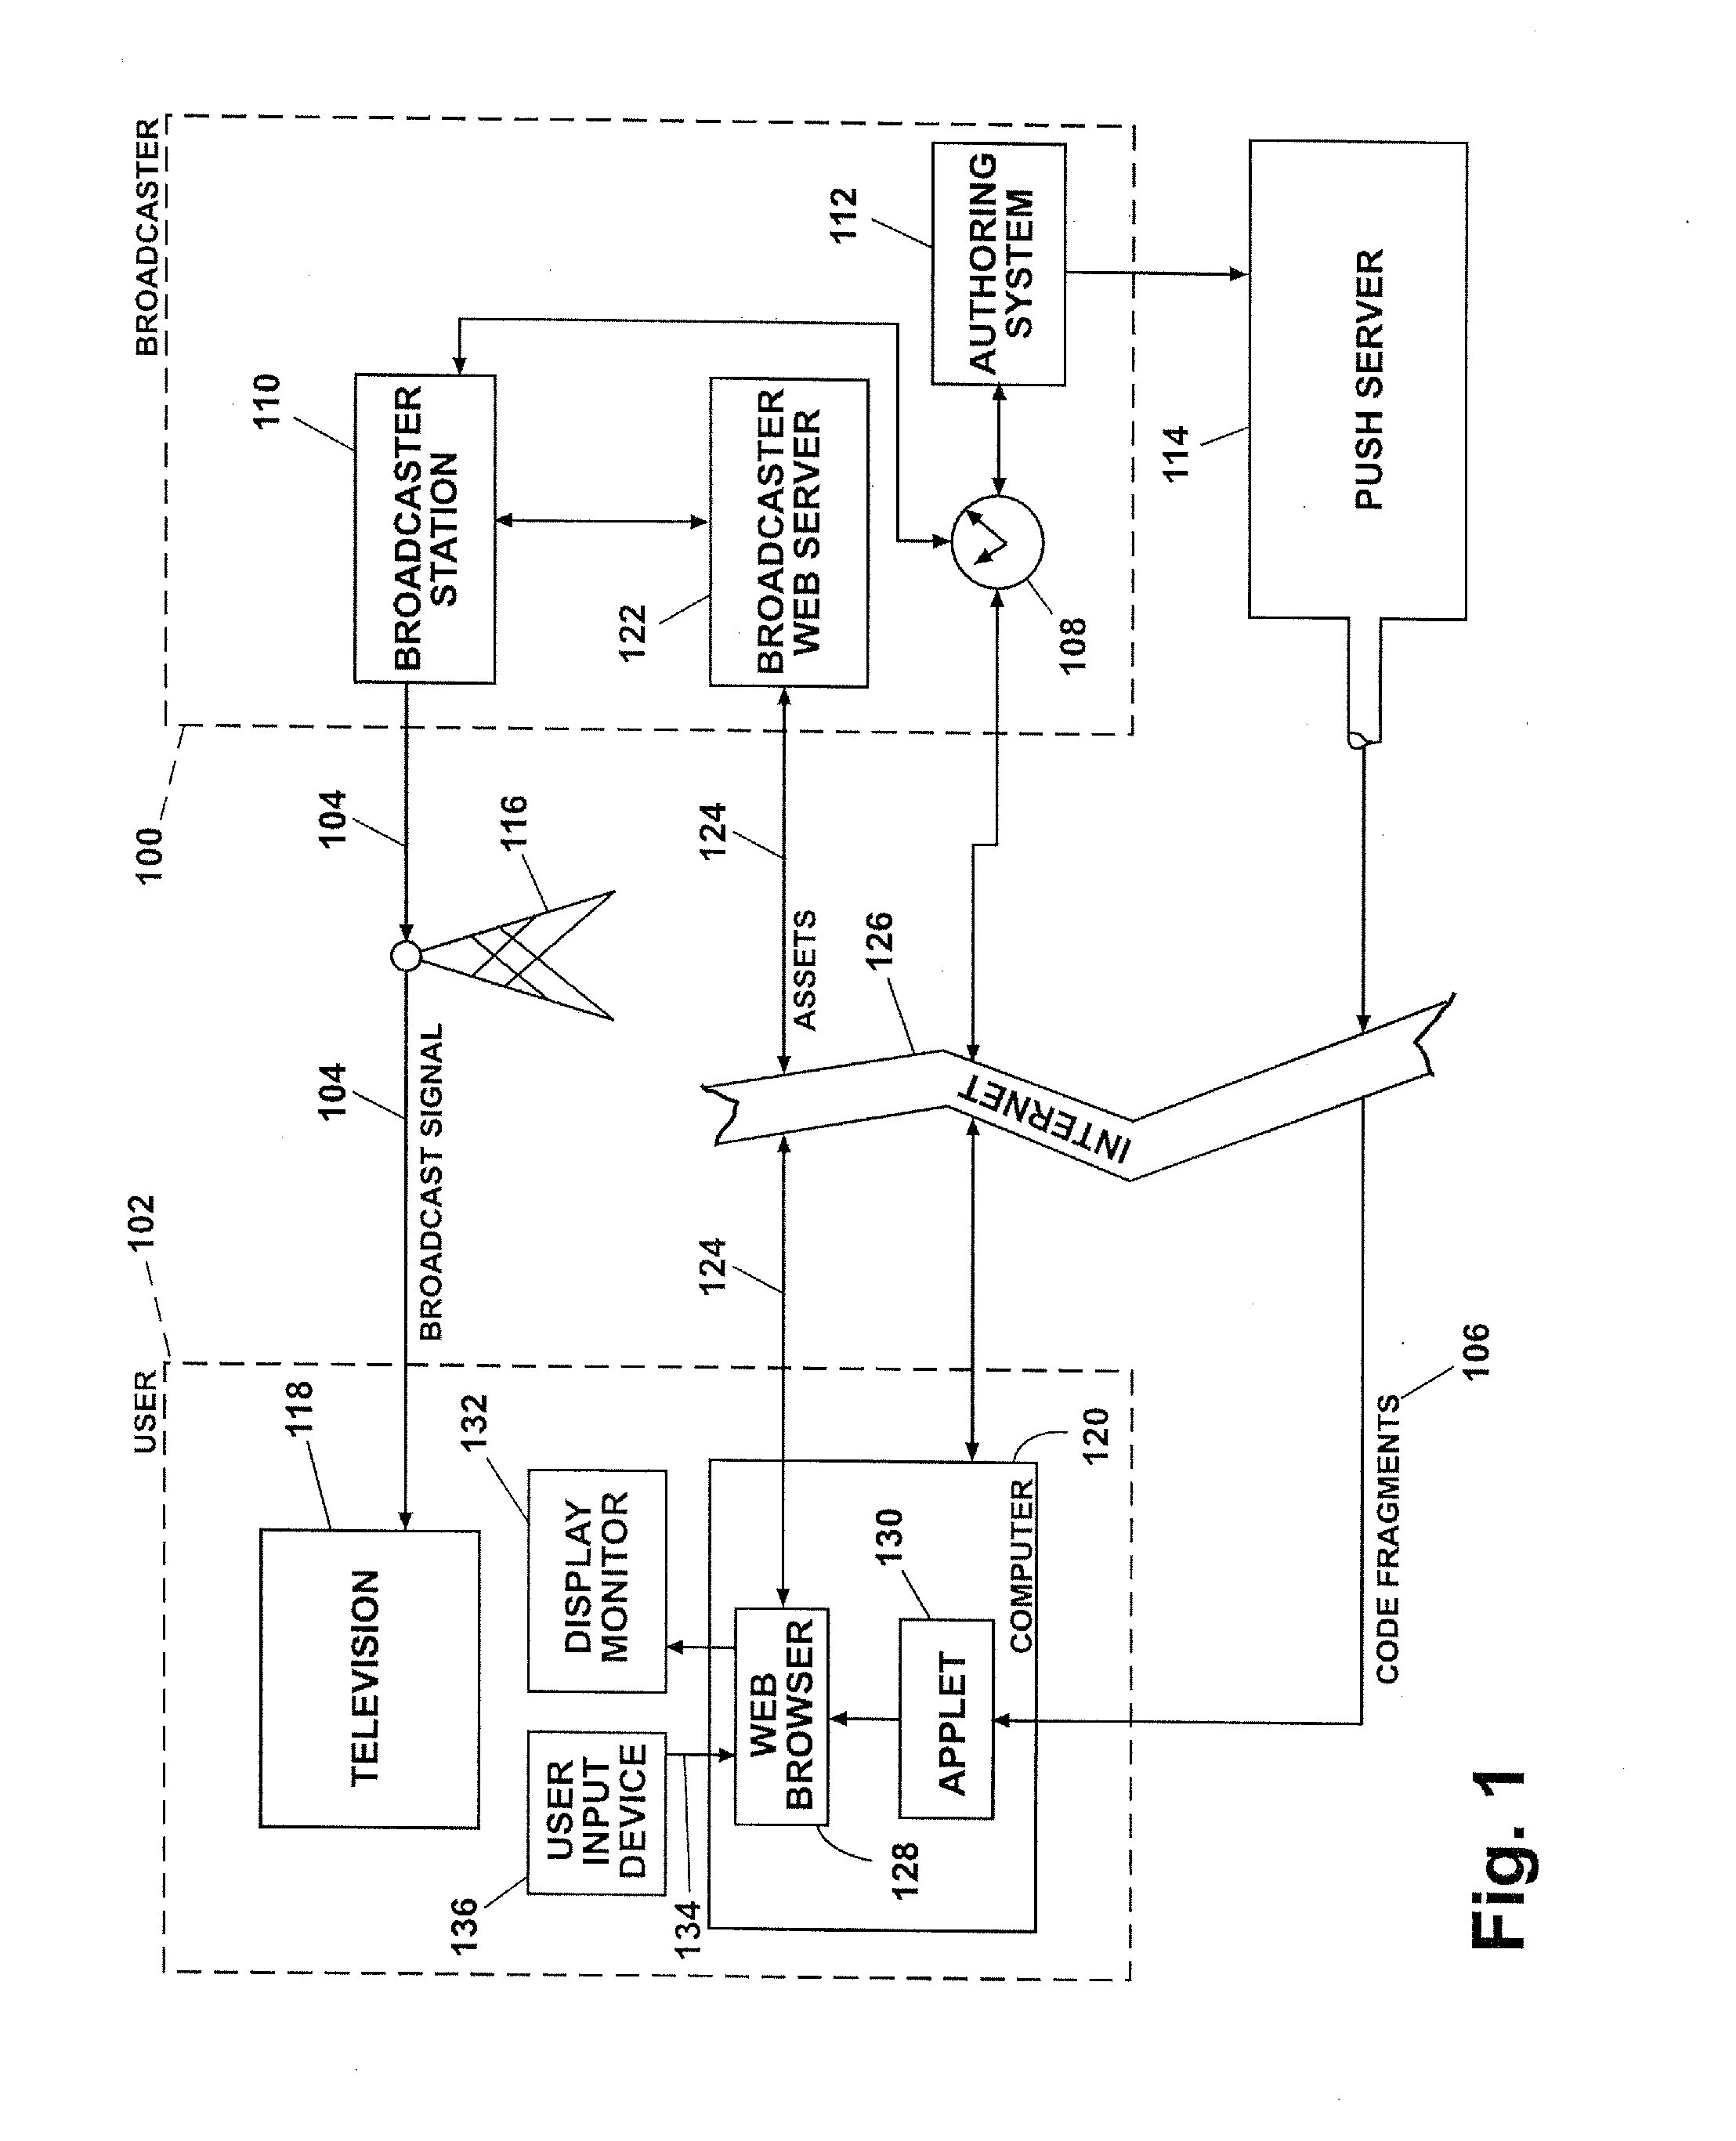 System and Method For Enhanced Broadcasting and Interactive Television